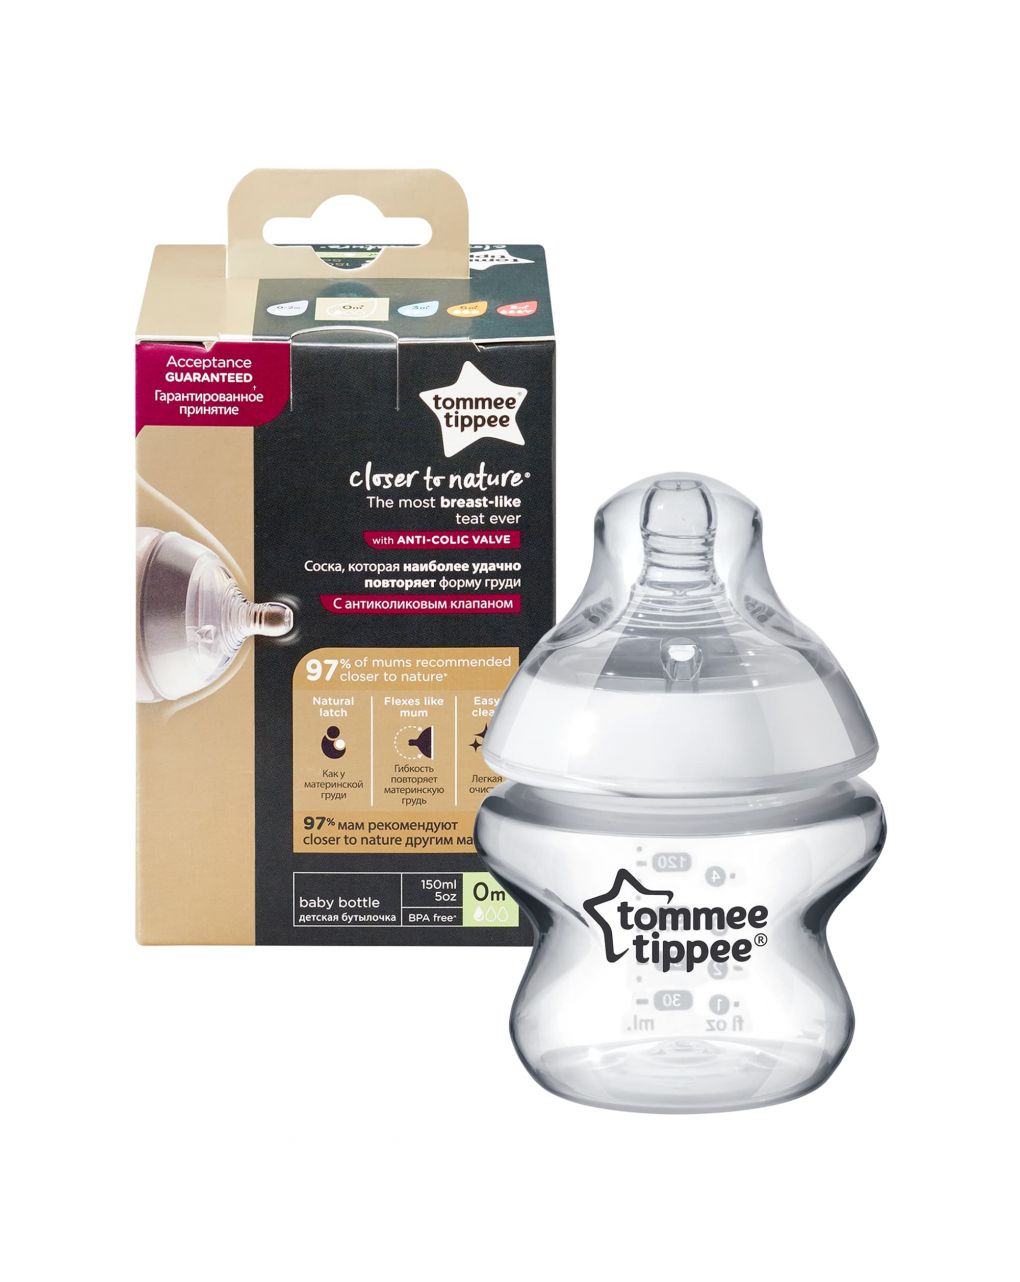 Biberon 150 ml perto do tommee de silicone natural - Tommee Tippee